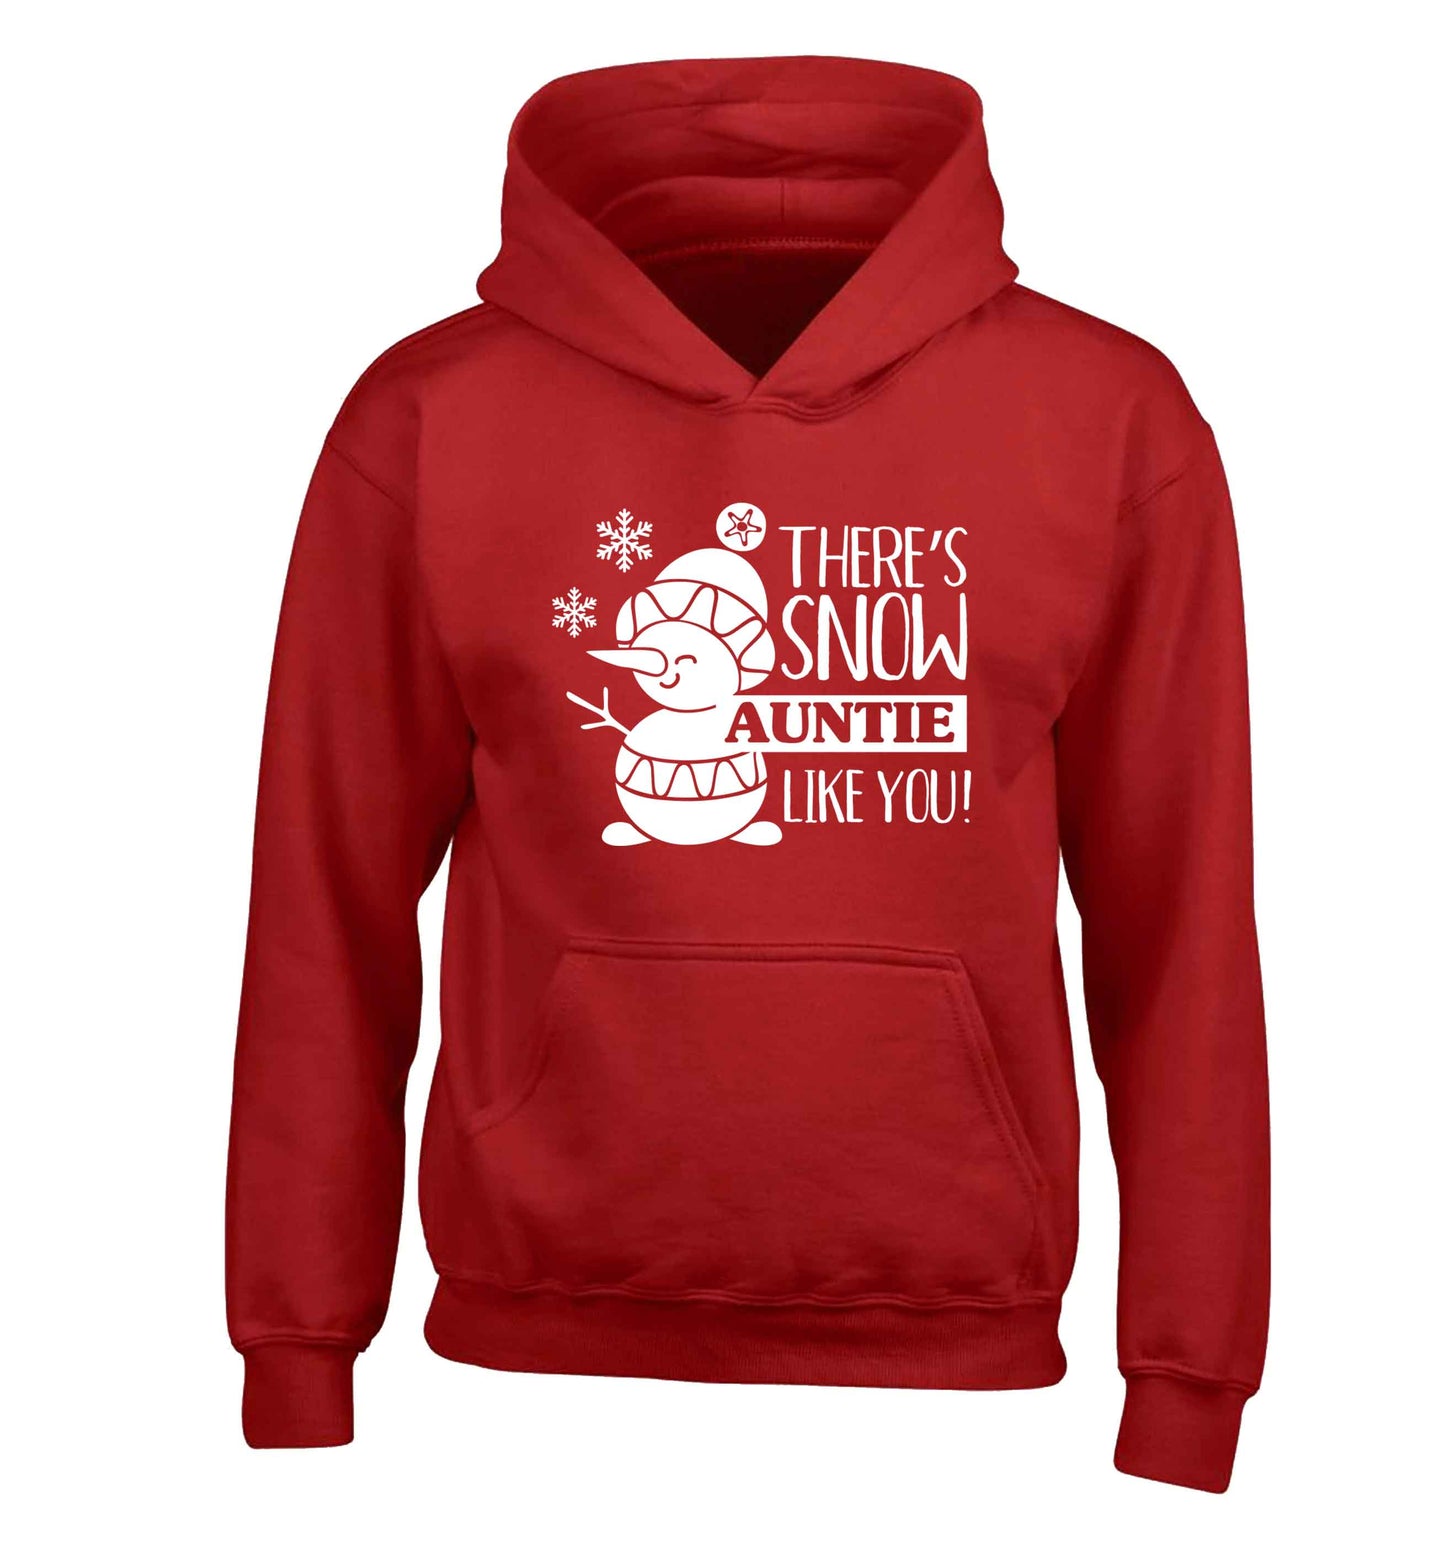 There's snow auntie like you children's red hoodie 12-13 Years